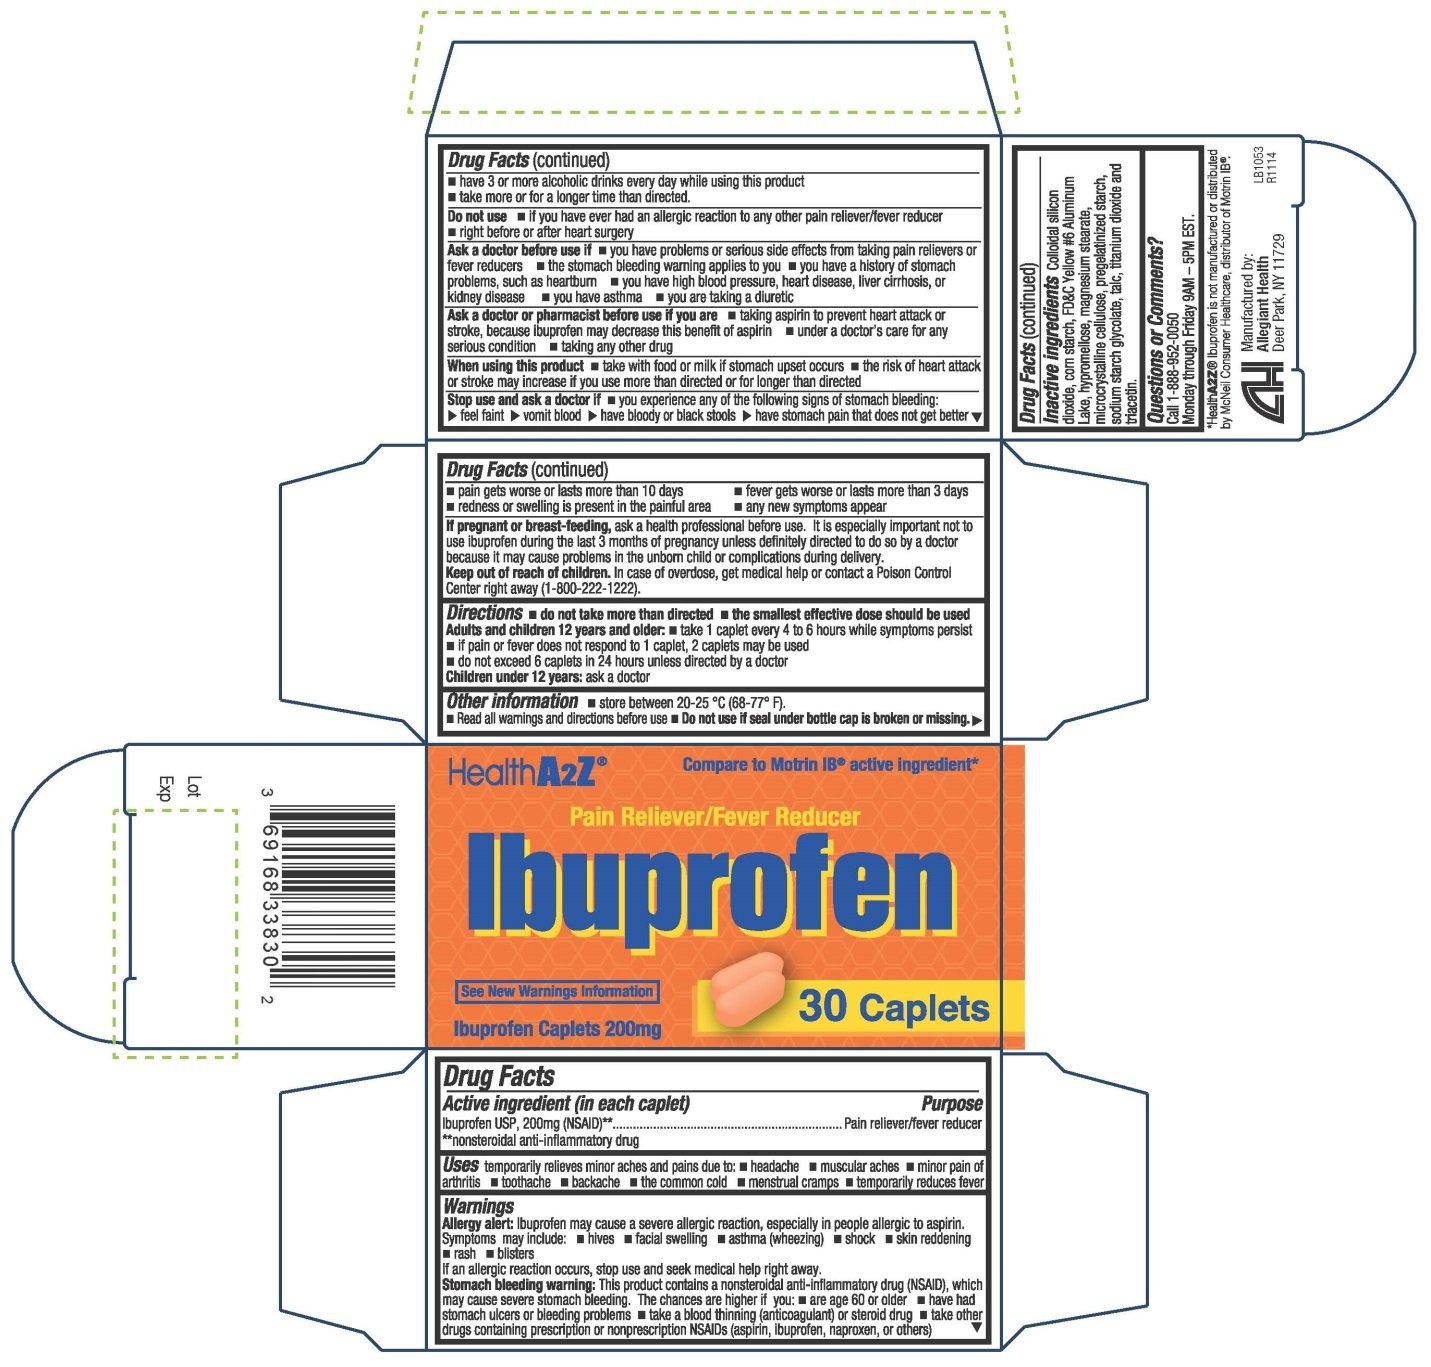 What are some ibuprofen warnings?